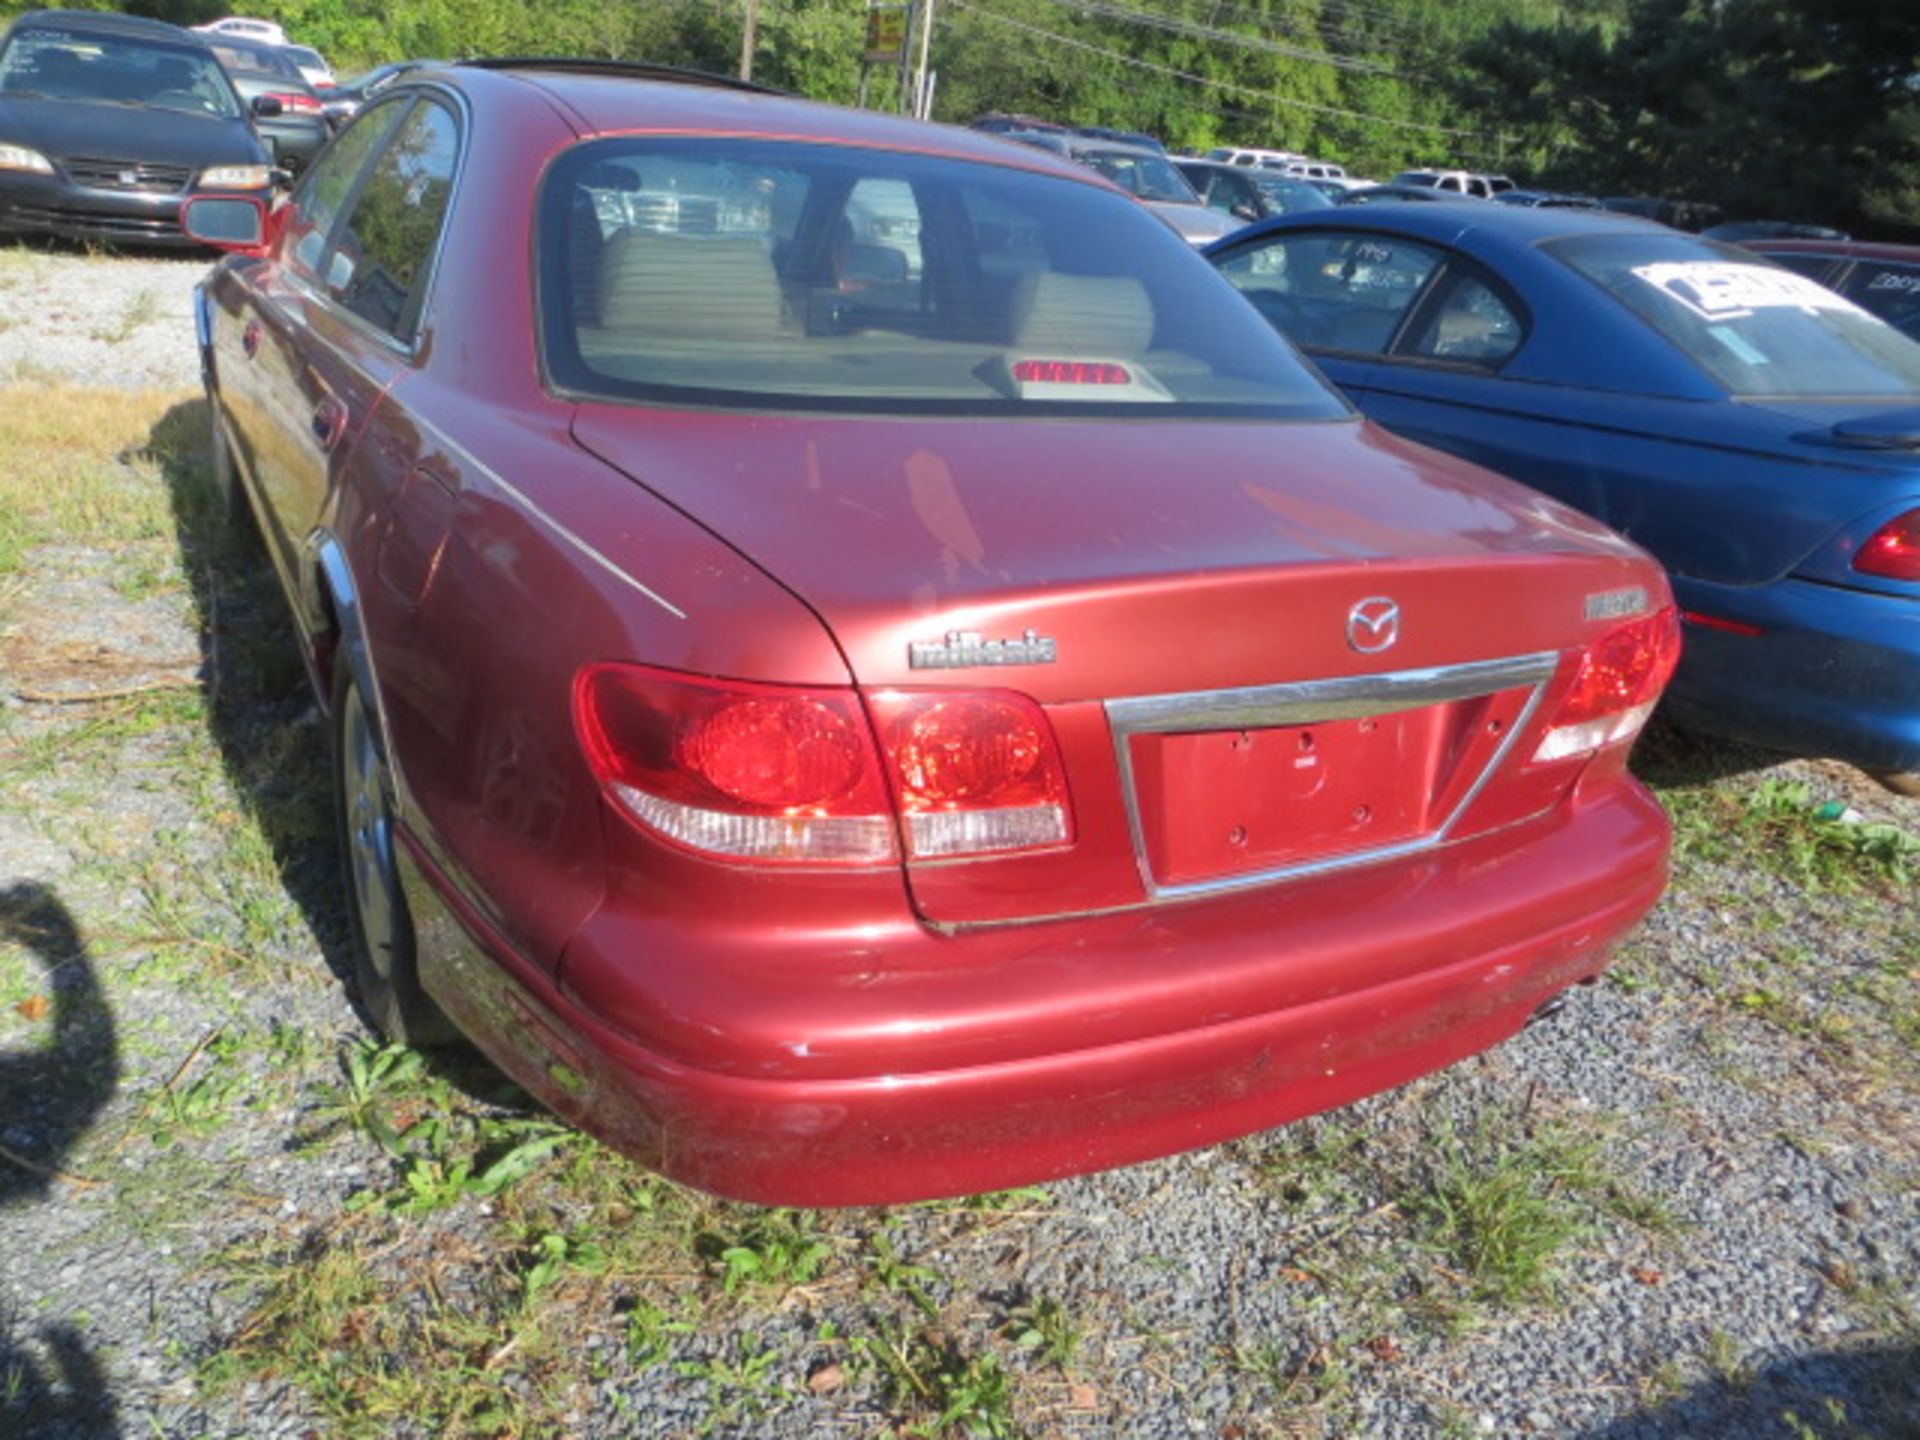 2001 Mazda Millenia-EXHAUST LEAKAGE 166000 MILES,VIN JM11A221211711416, SOLD GOOD TRANSFERABLE TITLE - Image 3 of 3